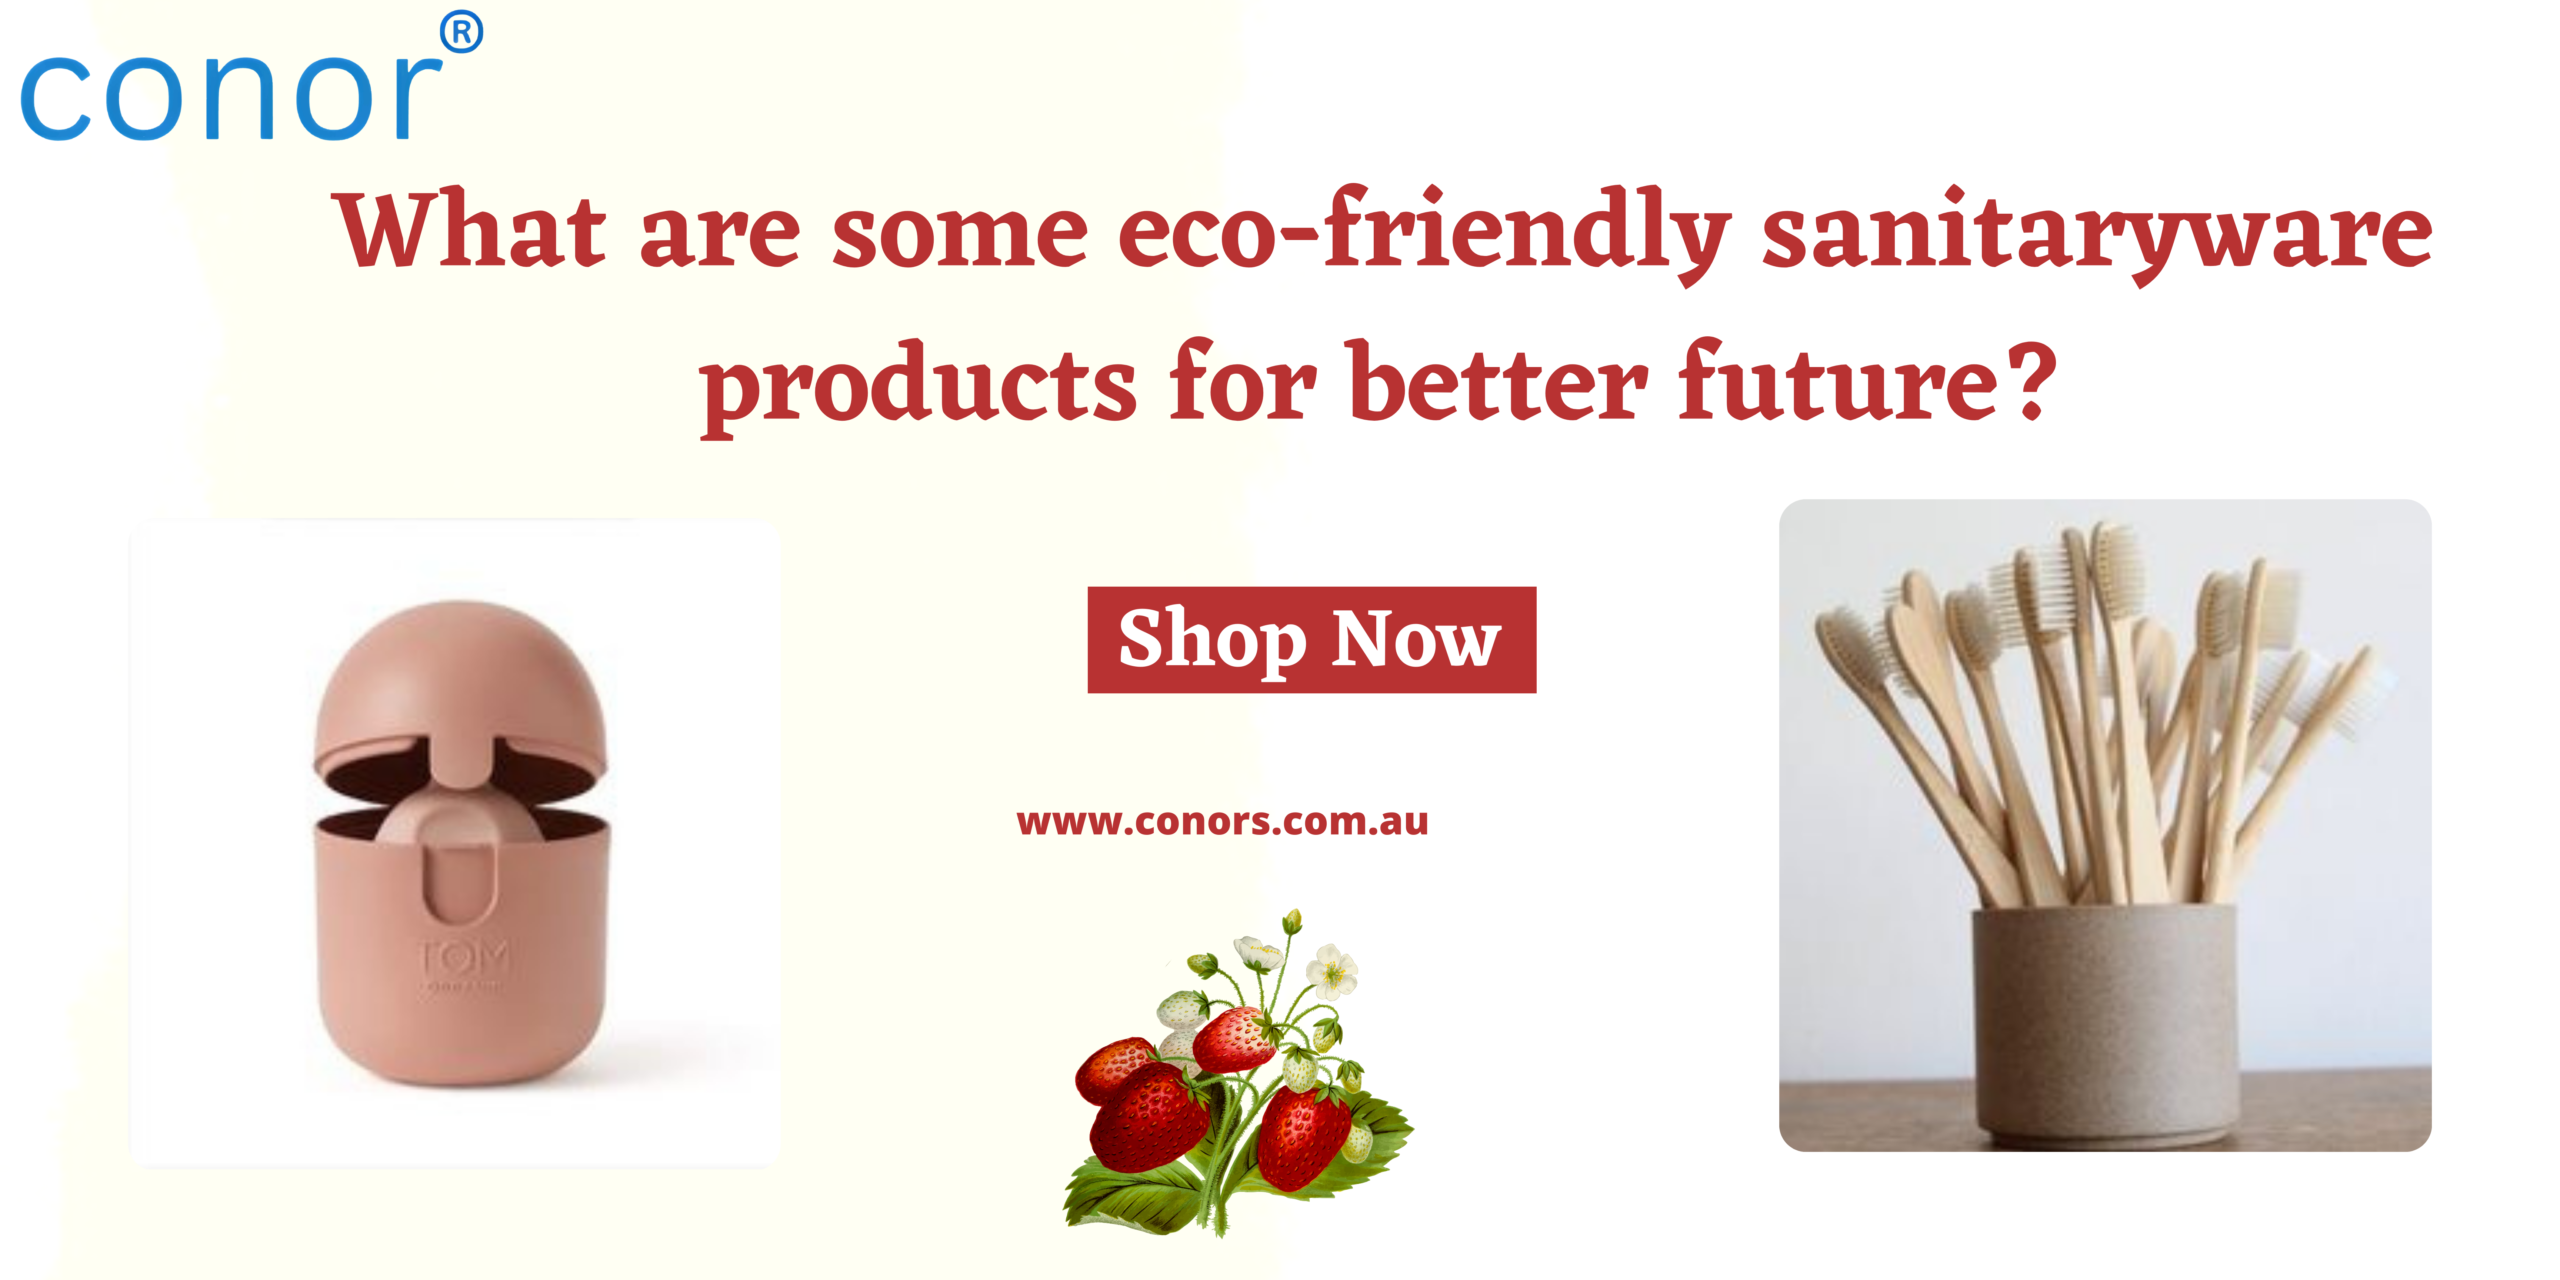 What are some eco-friendly sanitaryware products for better future